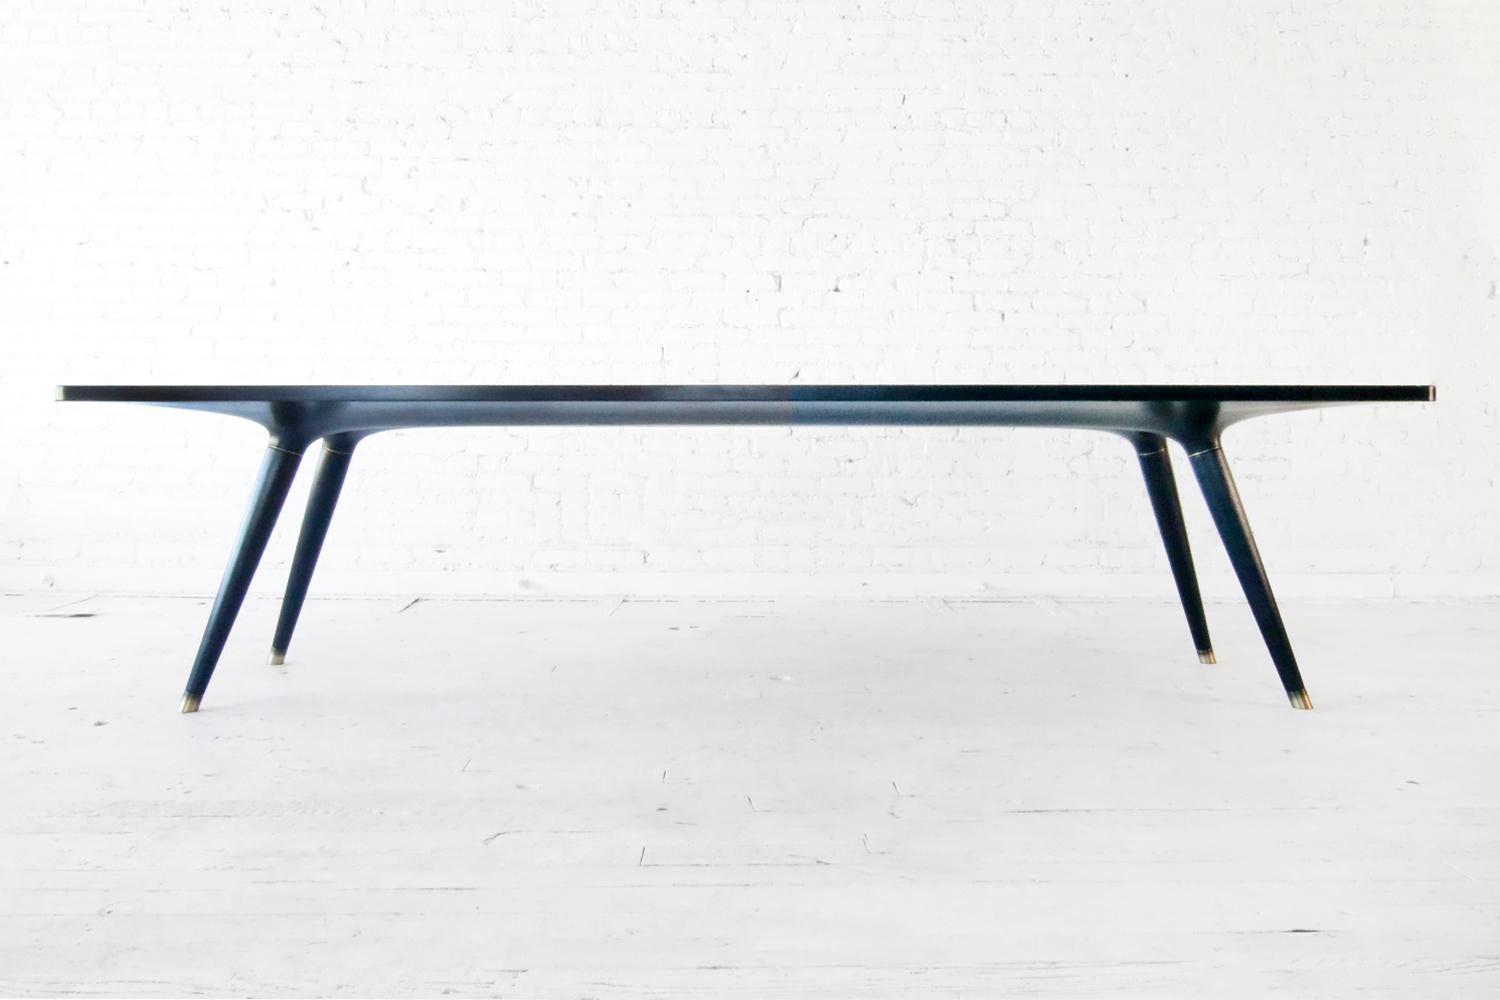 Ebonized dining table 001 from Series001 by Vincent Pocsik.

Vincent Pocsik finds the balance between old and new fabrication techniques working in conjunction to find an anatomical form that creates its own presence. Series 001 is about finding